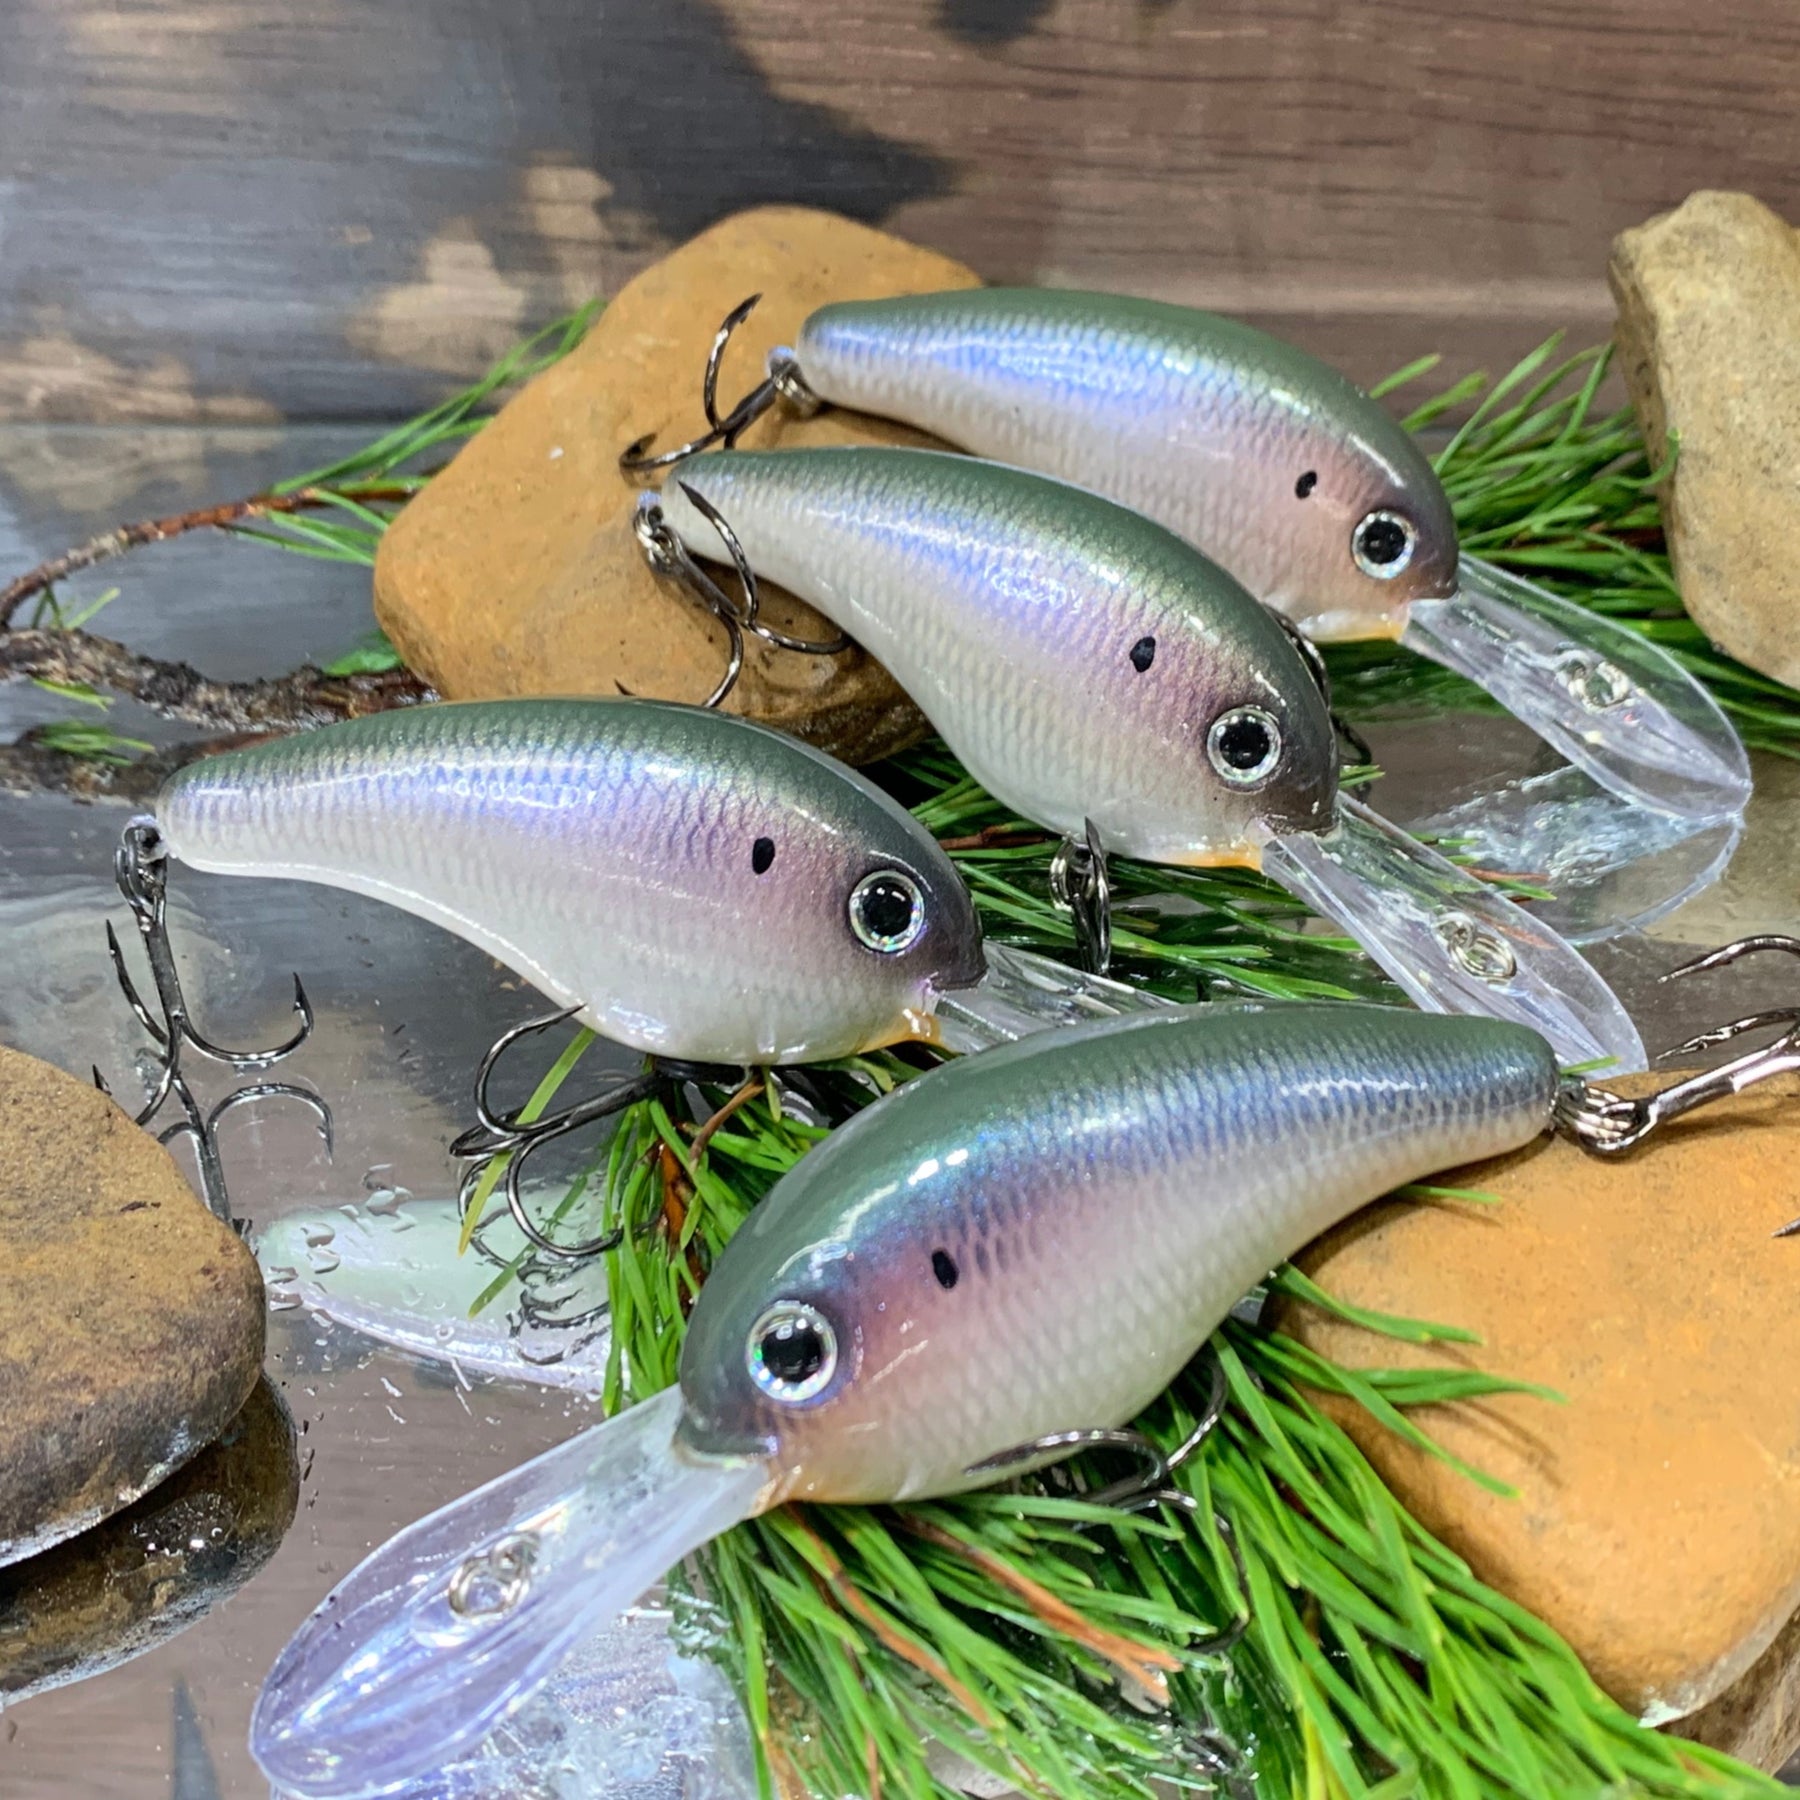 Fishing Lures, Wooden, Handmade, Painted and Epoxy Fishing Lures